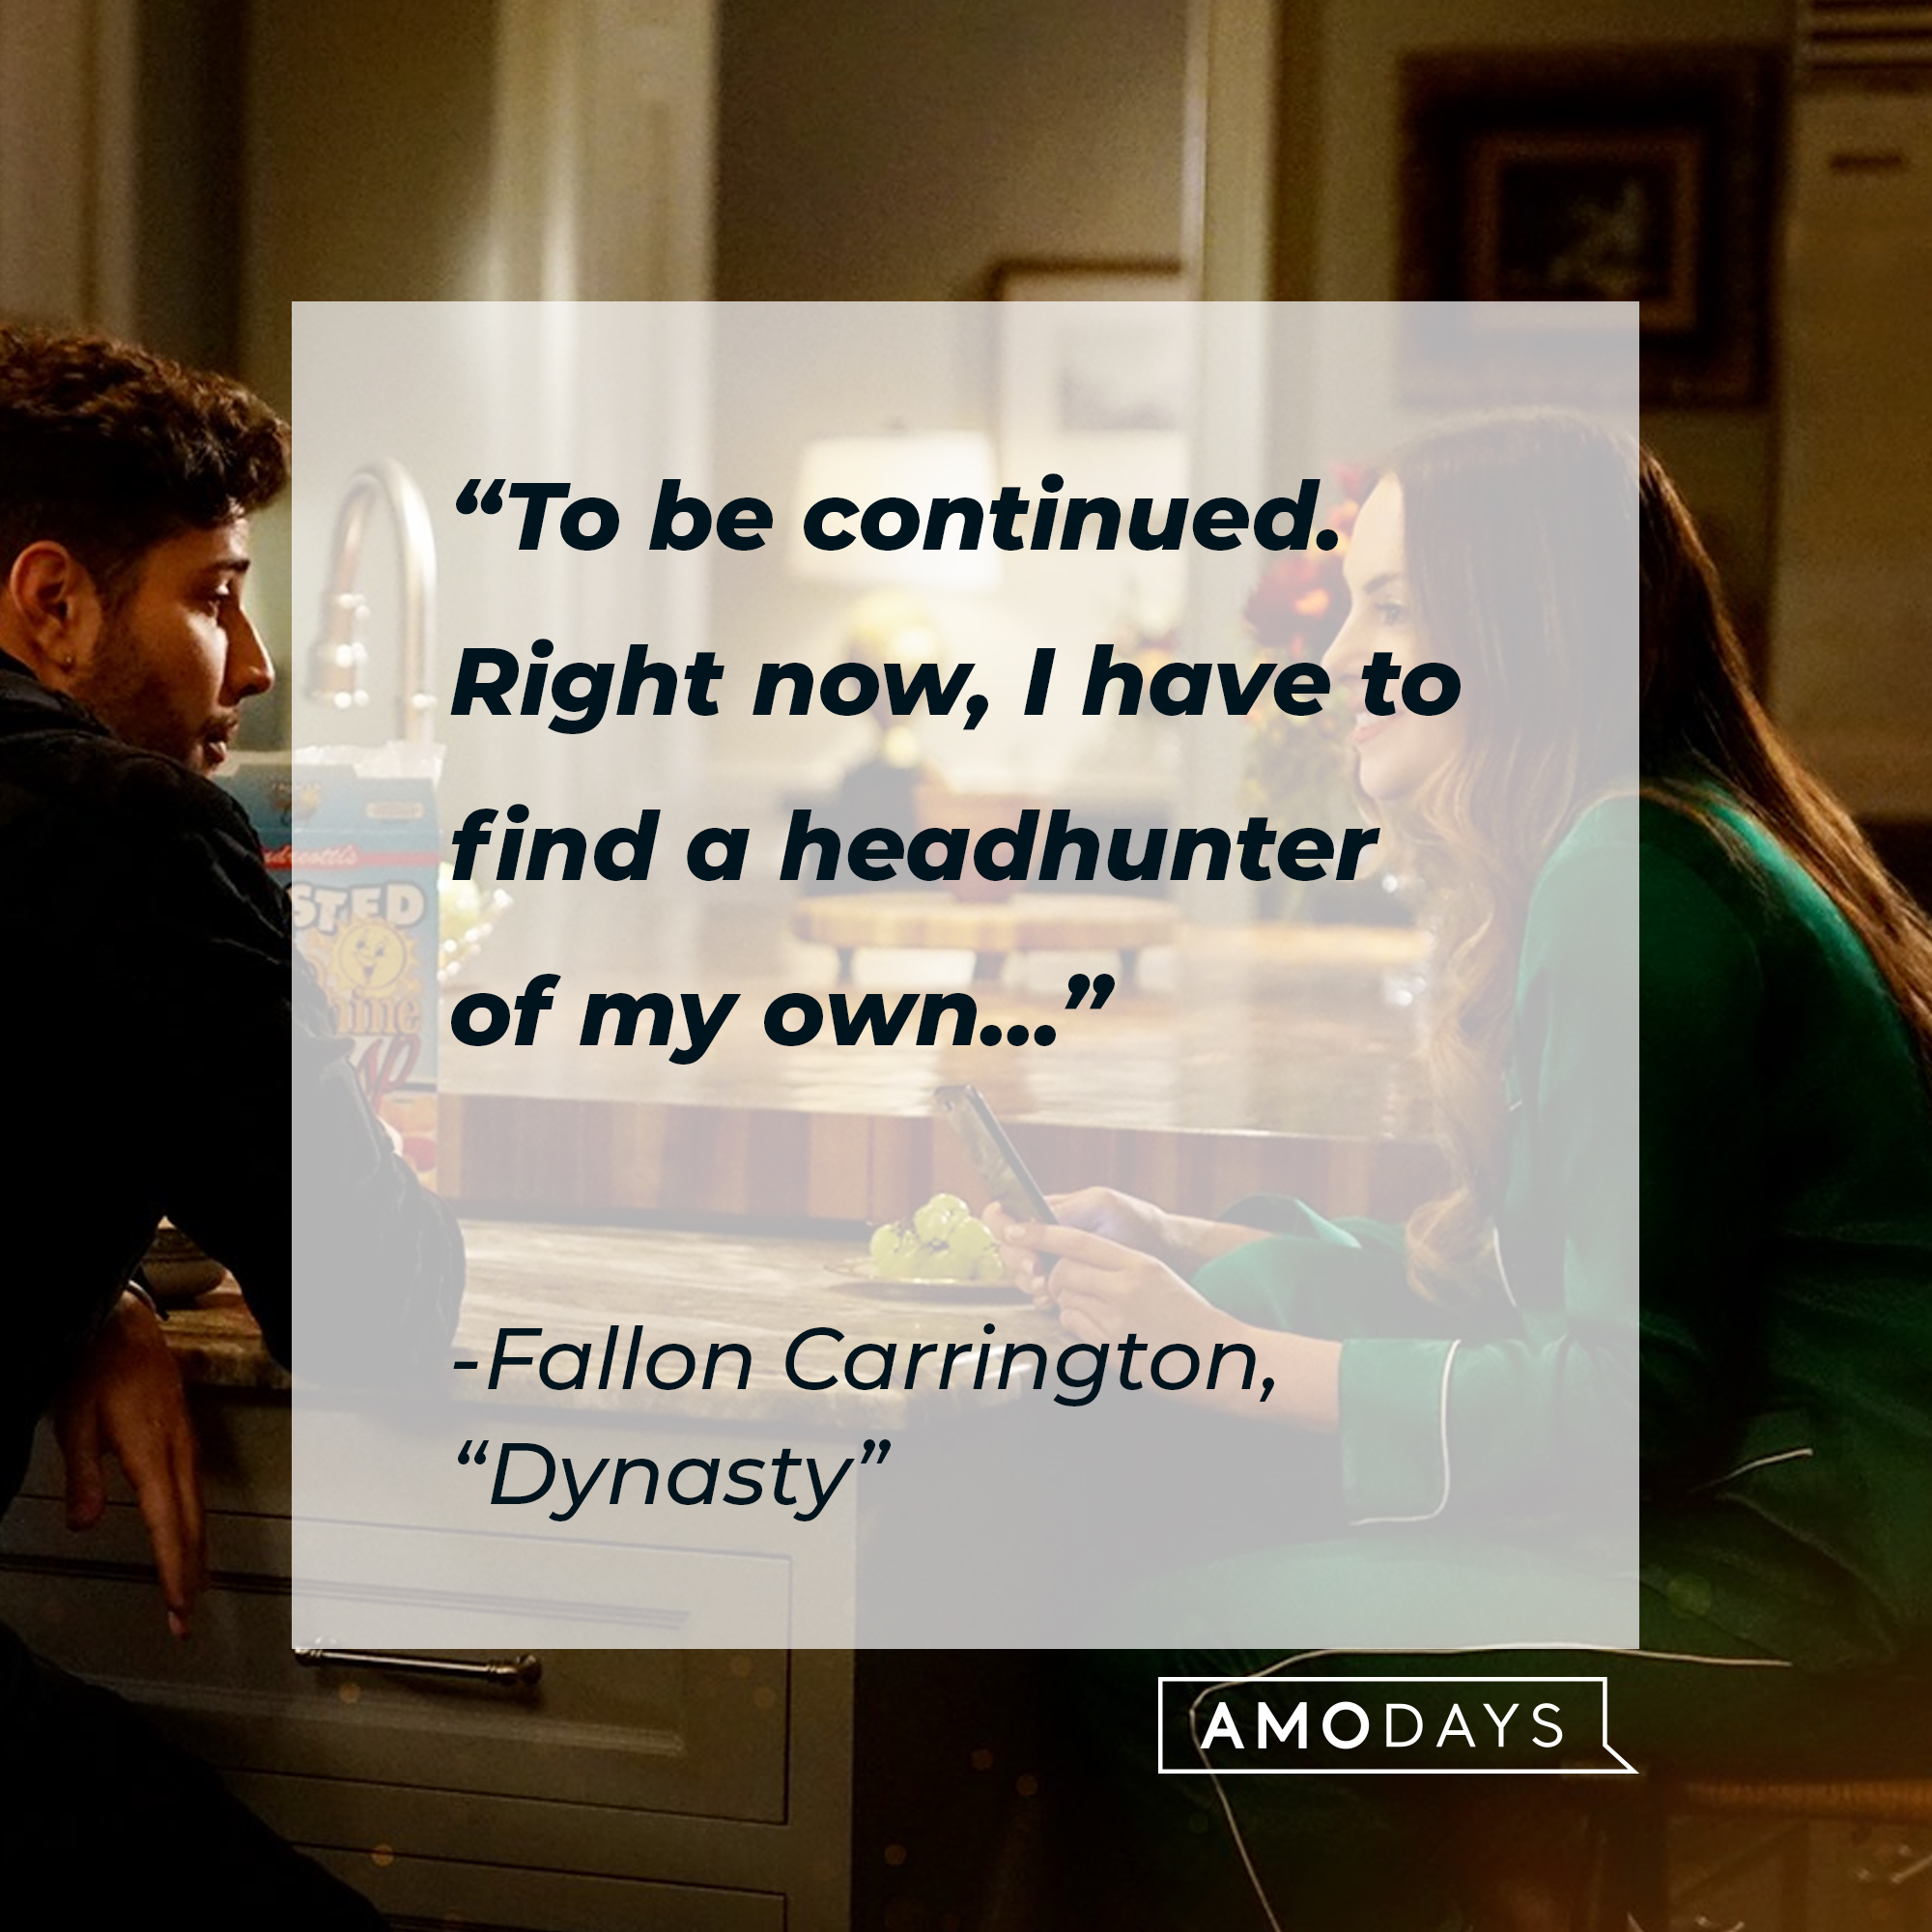 Fallon Carrington’s quote from “Dynasty”: “To be continued. Right now, I have to find a headhunter of my own...” | Source: facebook.com/DynastyOnTheCW